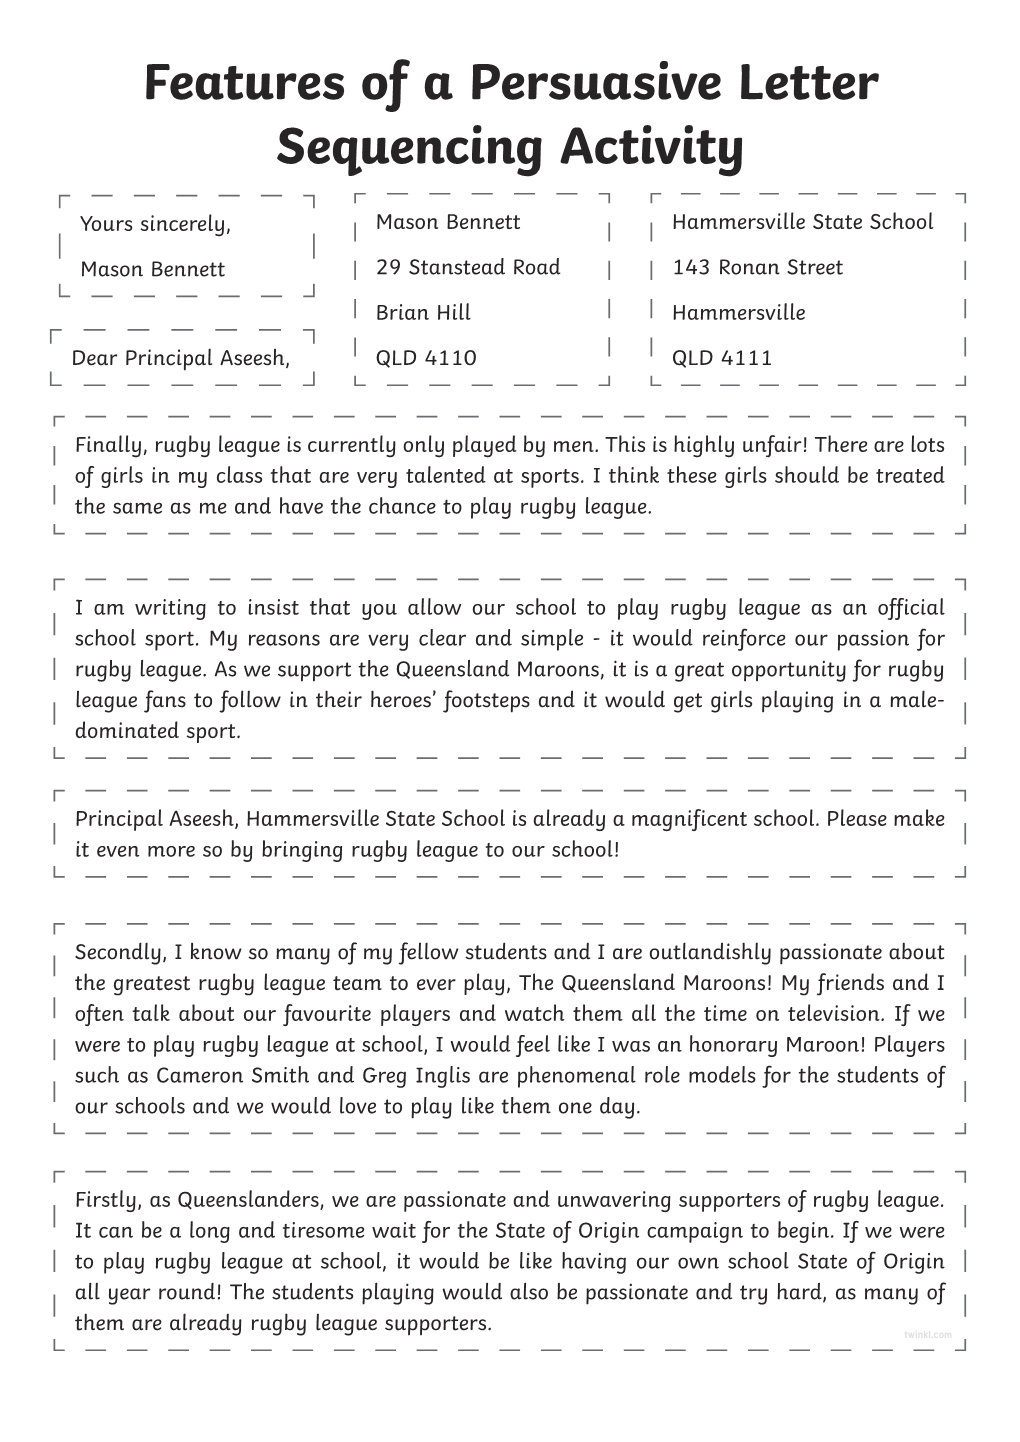 Features of a Persuasive Letter Sequencing Activity